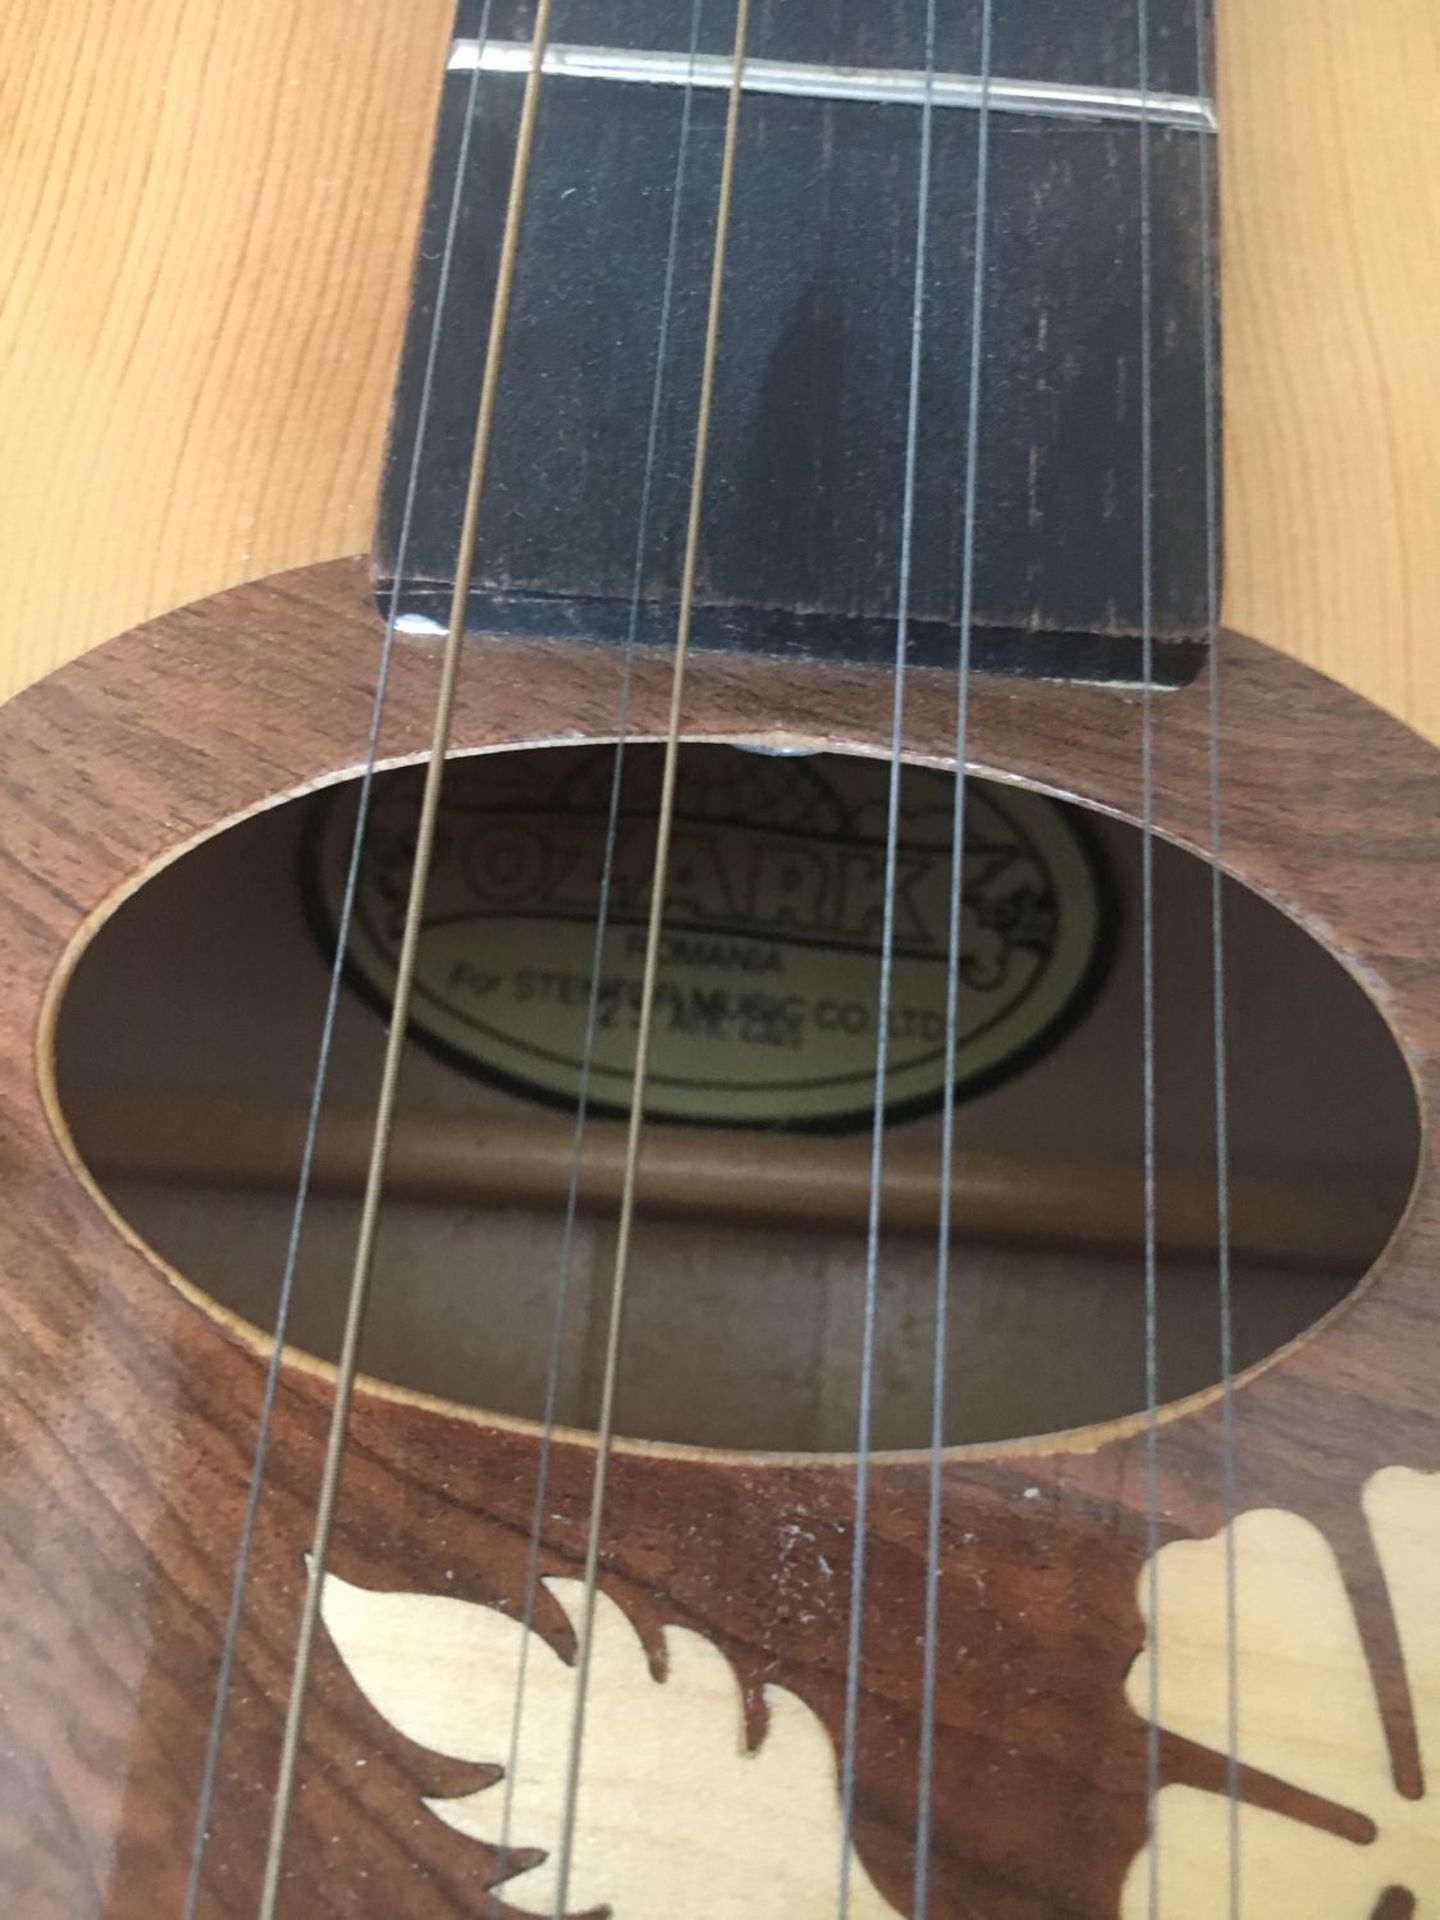 OZARK EIGHT STRING MANDOLIN. Made in Romania. Spruce top with an inlaid escutcheon. The back and - Image 2 of 2